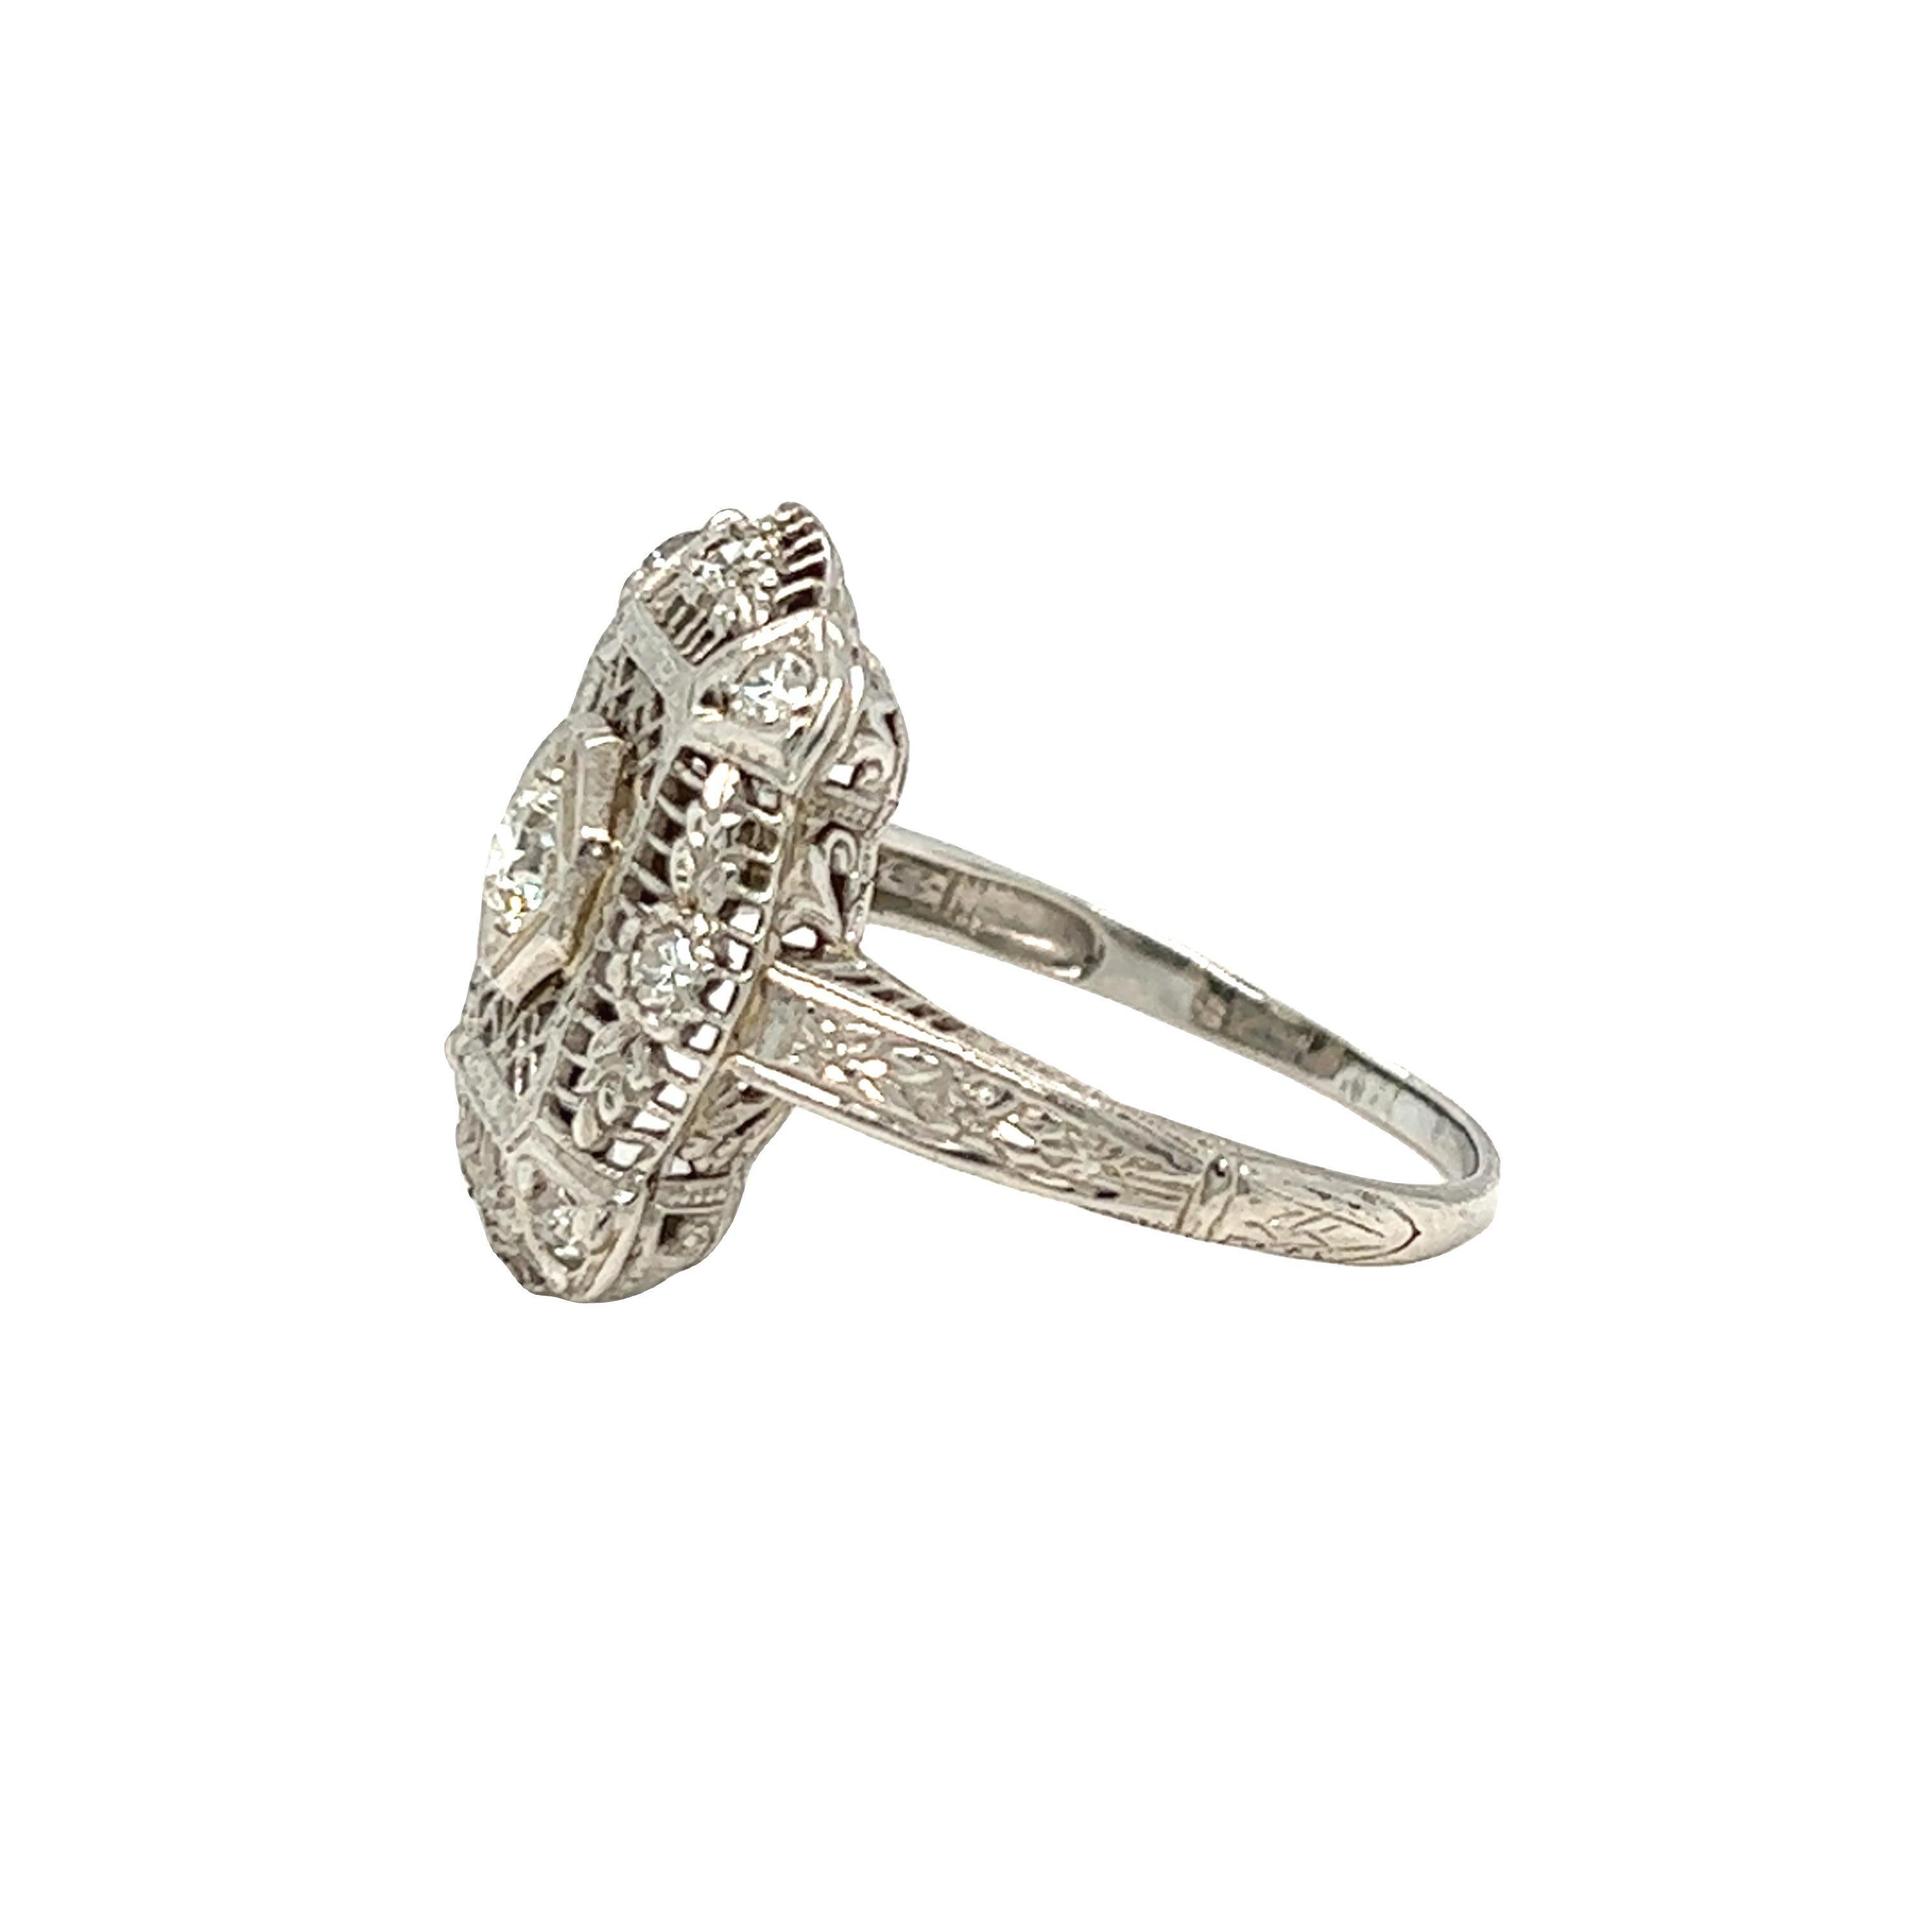 Edwardian Era Diamond Ring 18K White Gold In Good Condition For Sale In beverly hills, CA